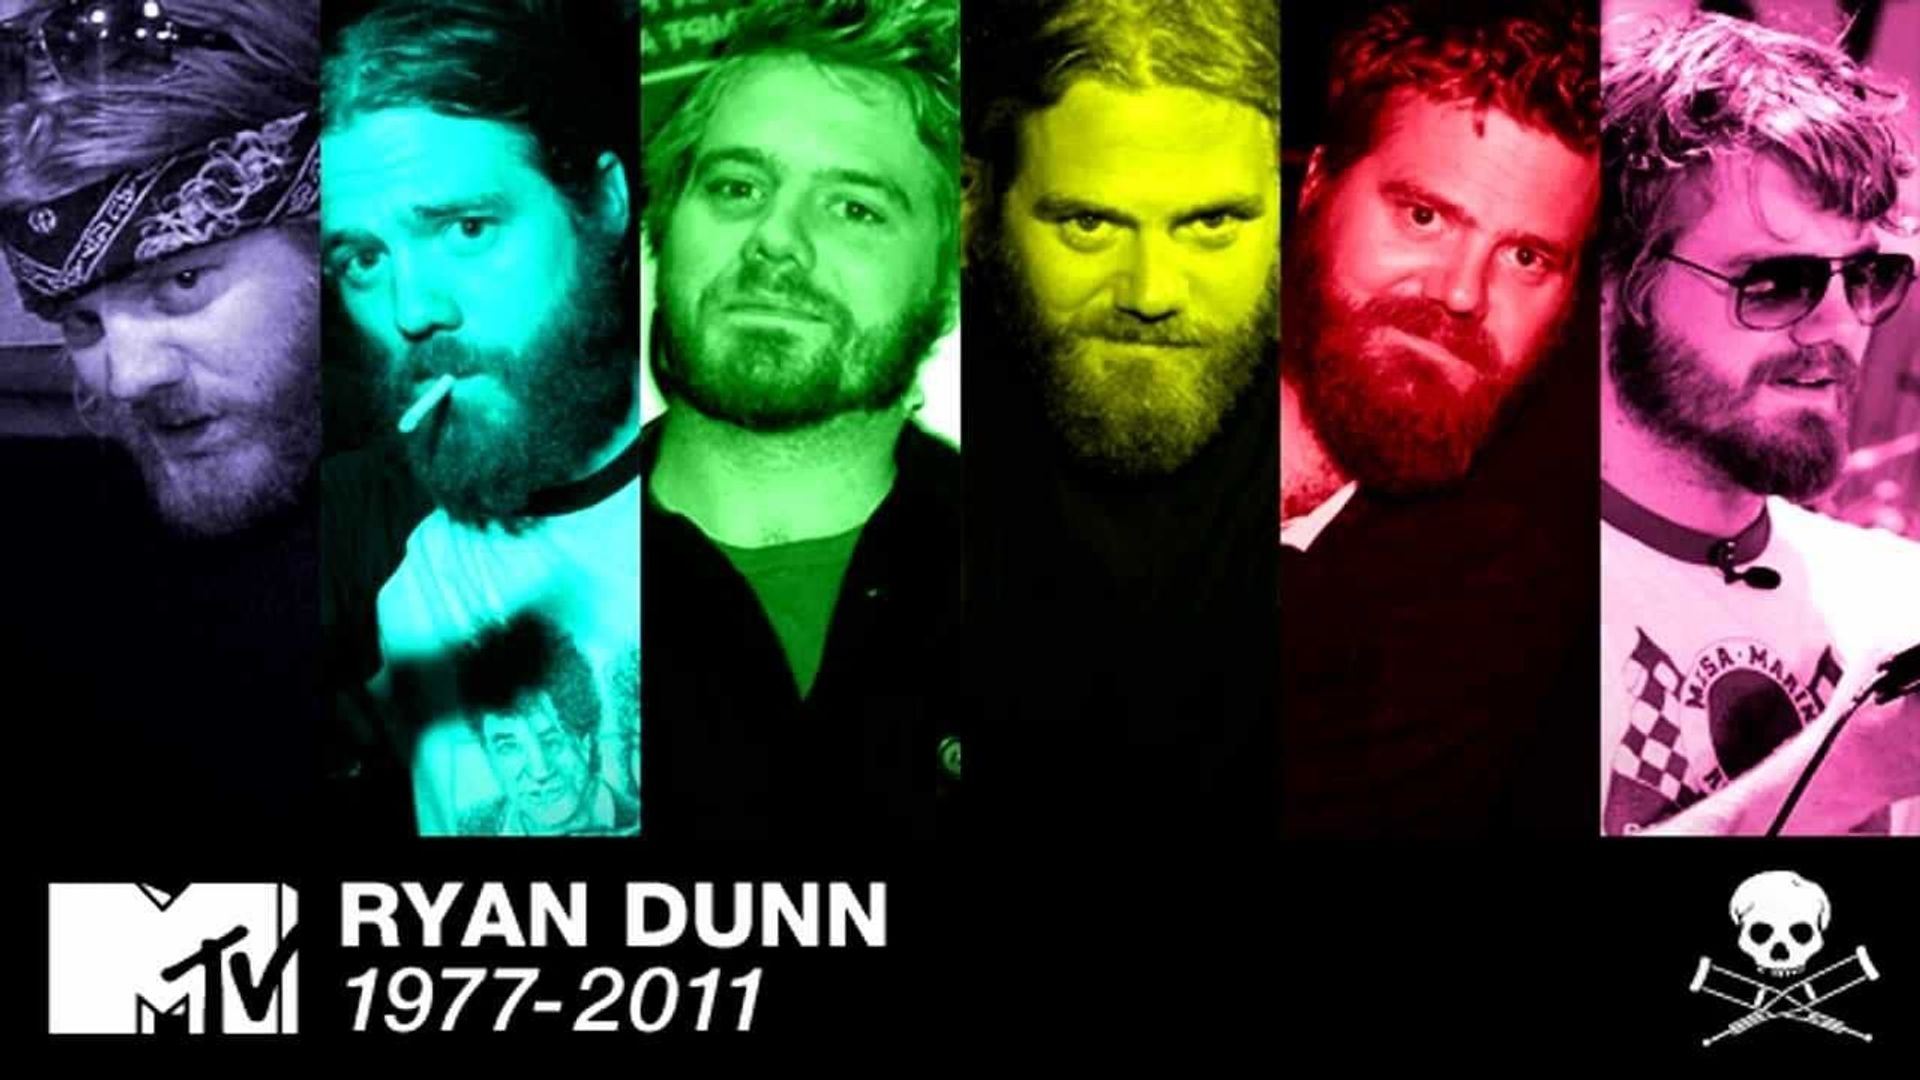 A Tribute to Ryan Dunn background